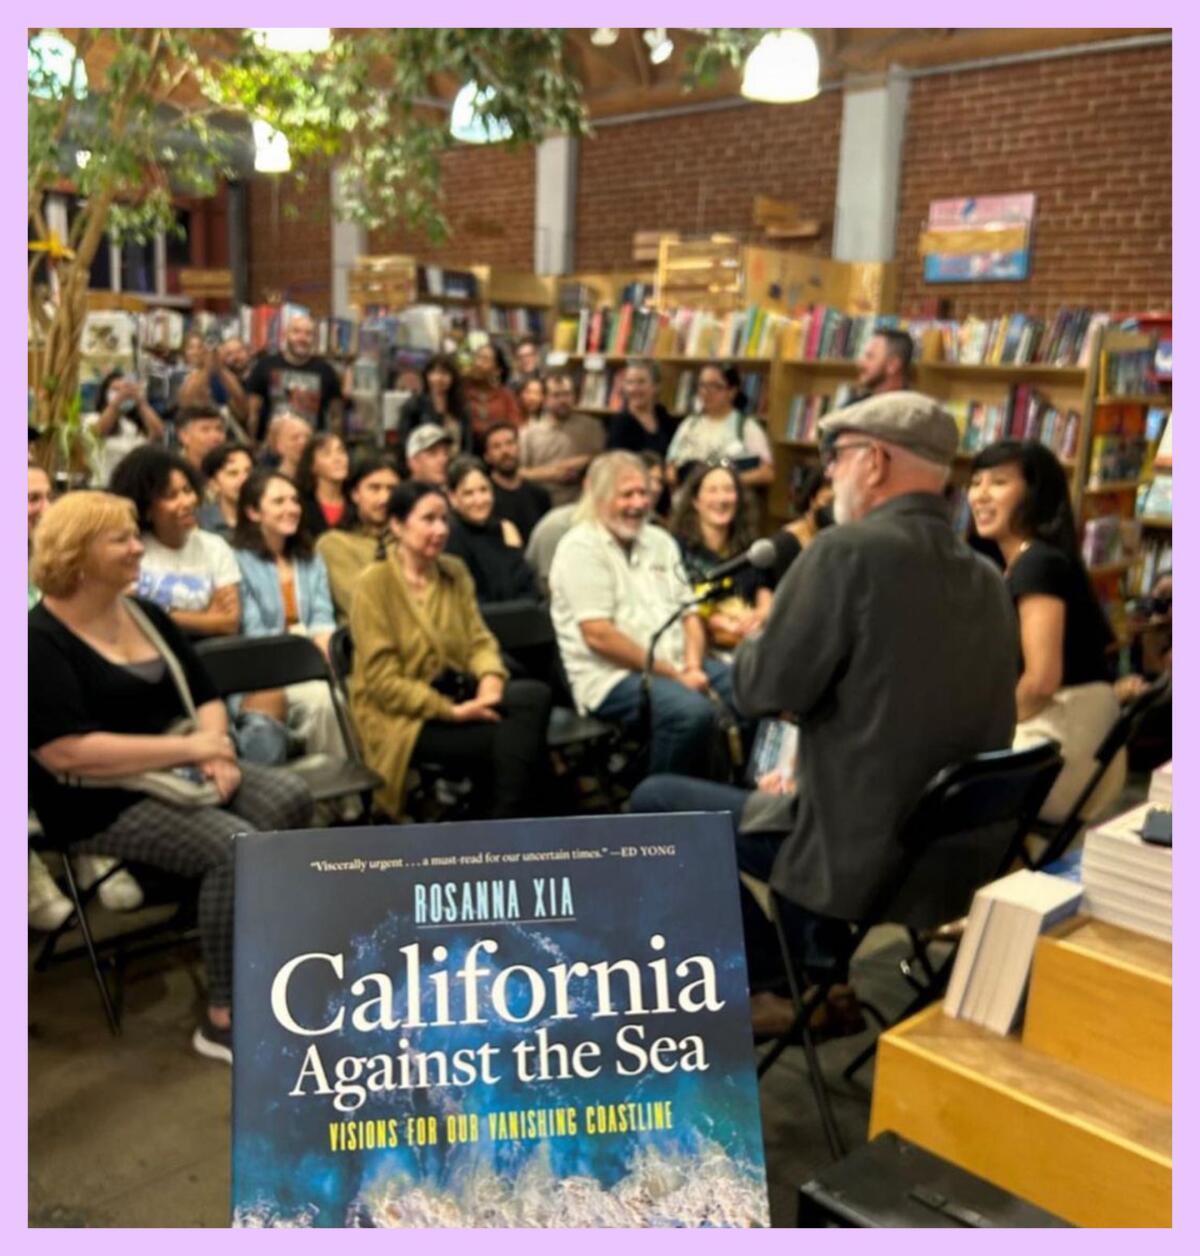 A group of people listening to someone speak with a book cover for "California Against the Sea" in the foreground